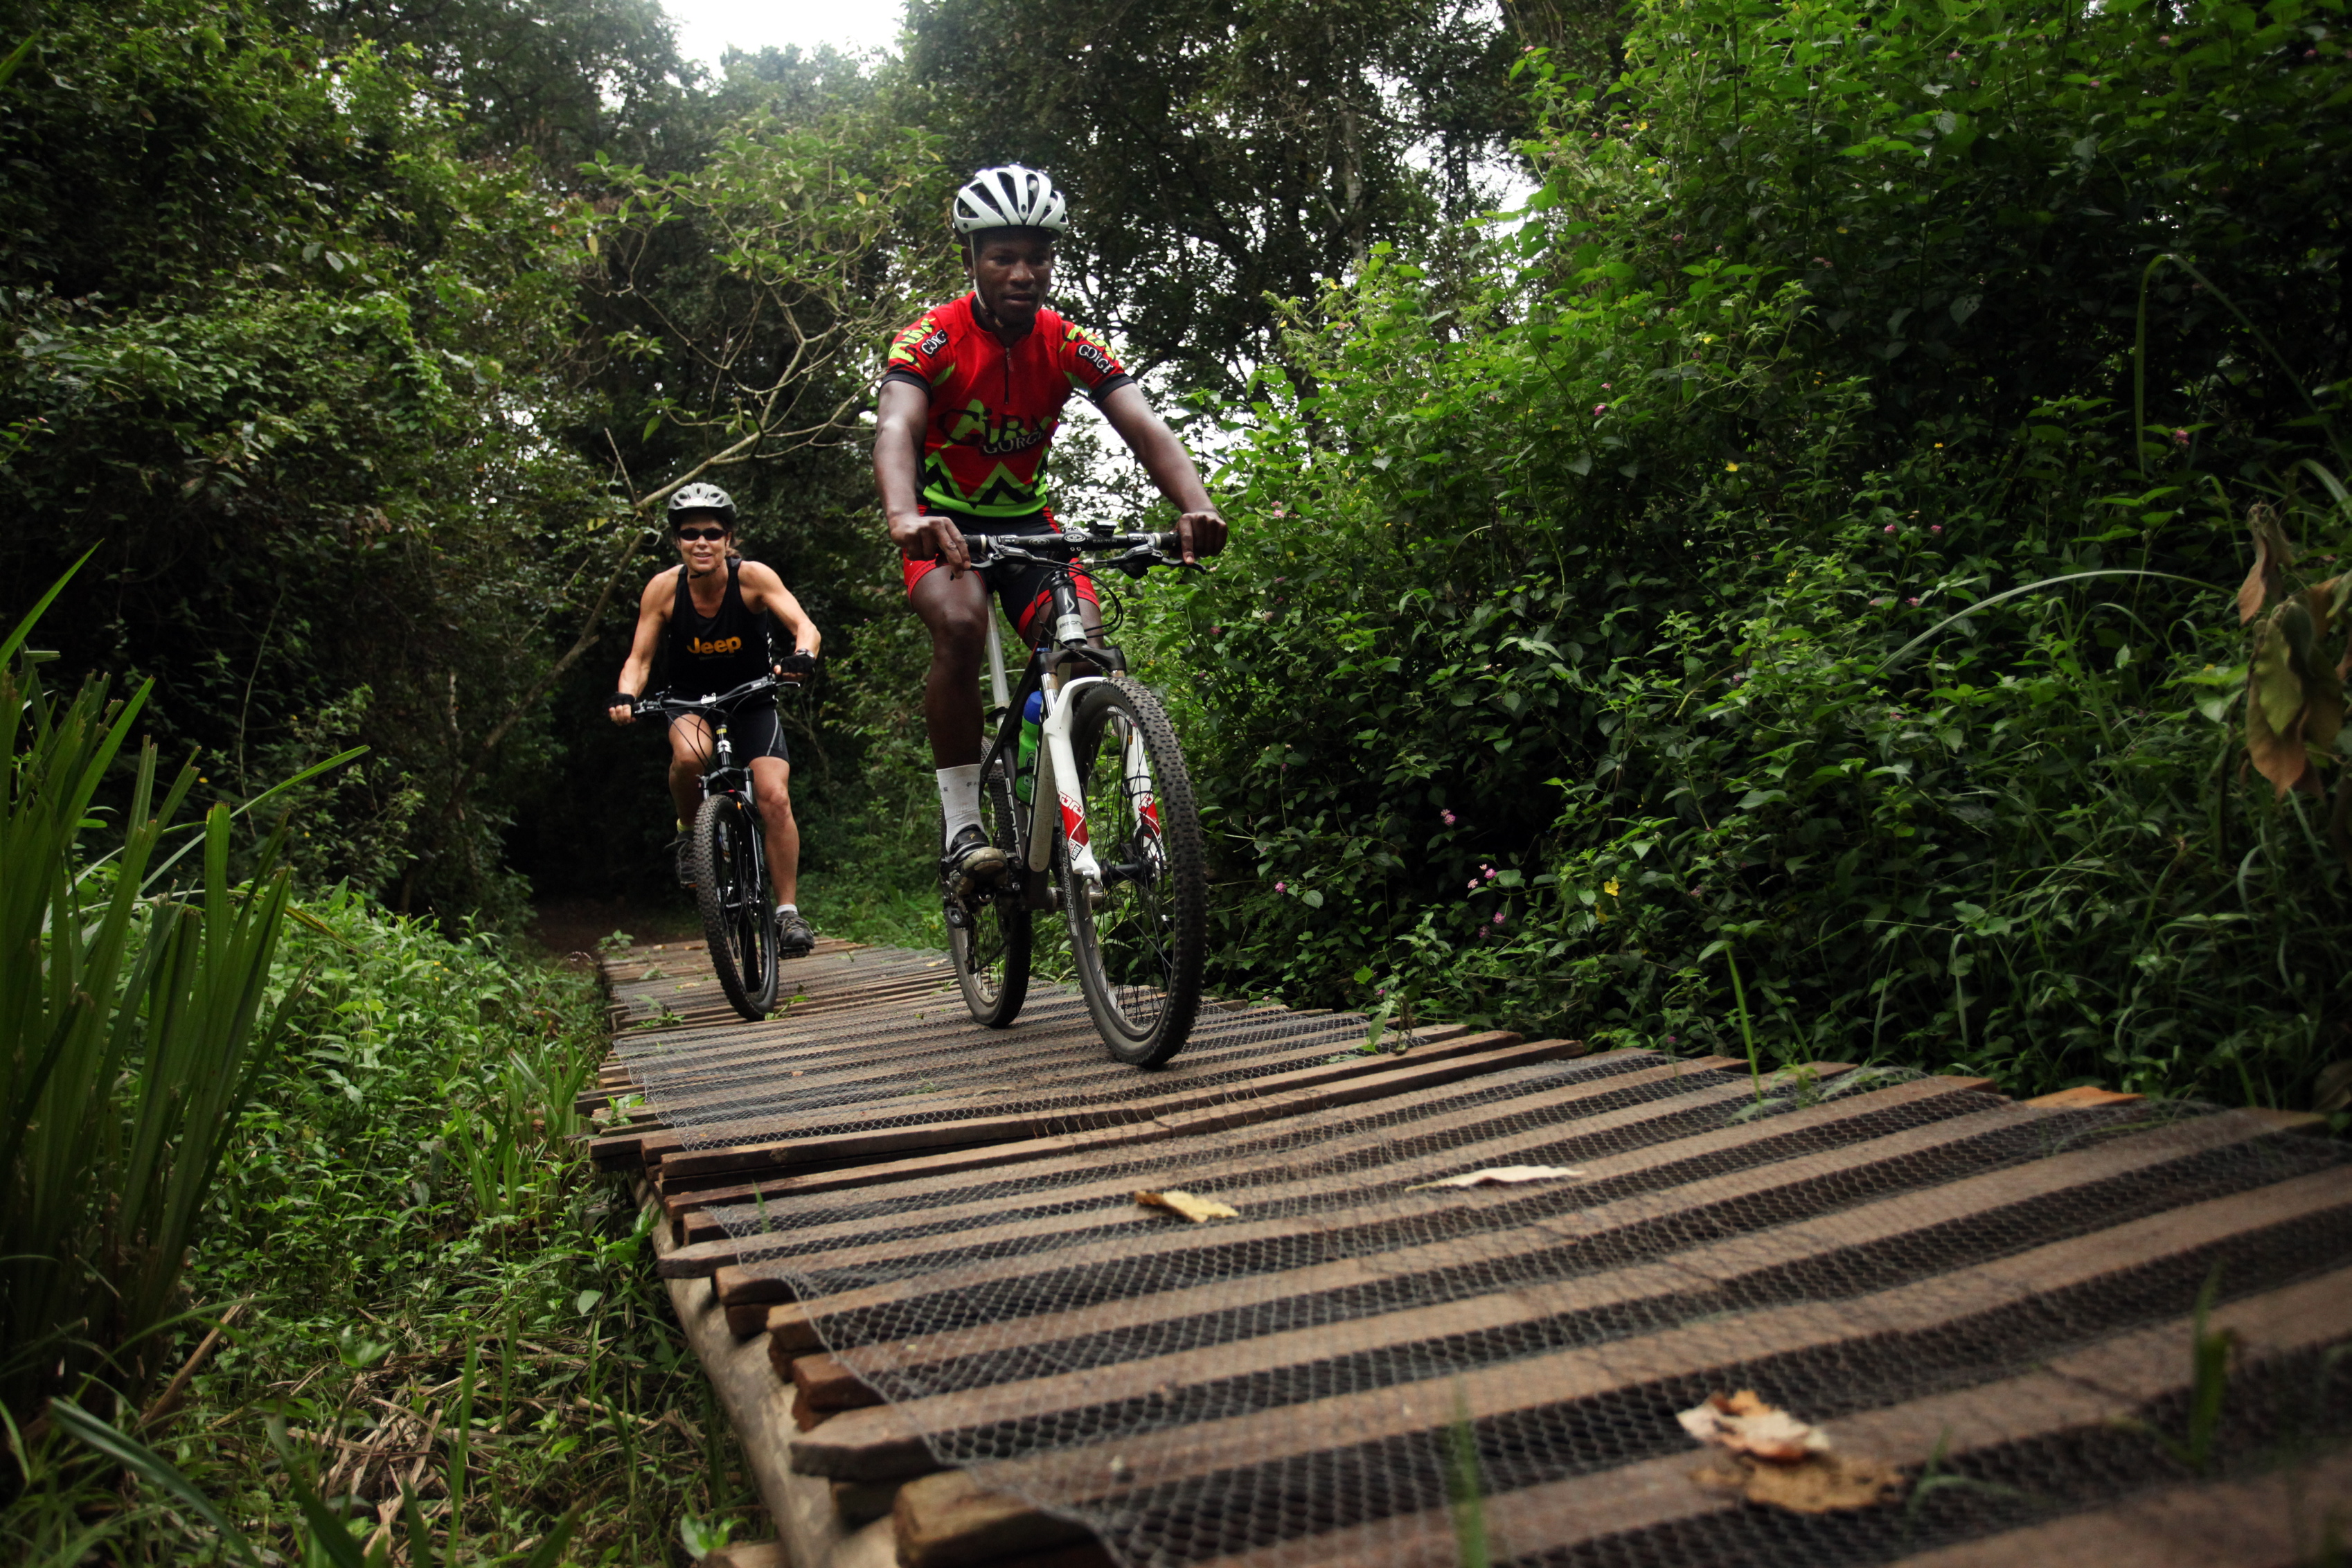 DURBAN, SOUTH AFRICA - FEBRUARY 23: Ayanda Ngununza cycles through the Giba Gorge in Durban, South Africa on February 23, 2012. (Photo by Gallo Images / The Times / Marianne Schwankhart)